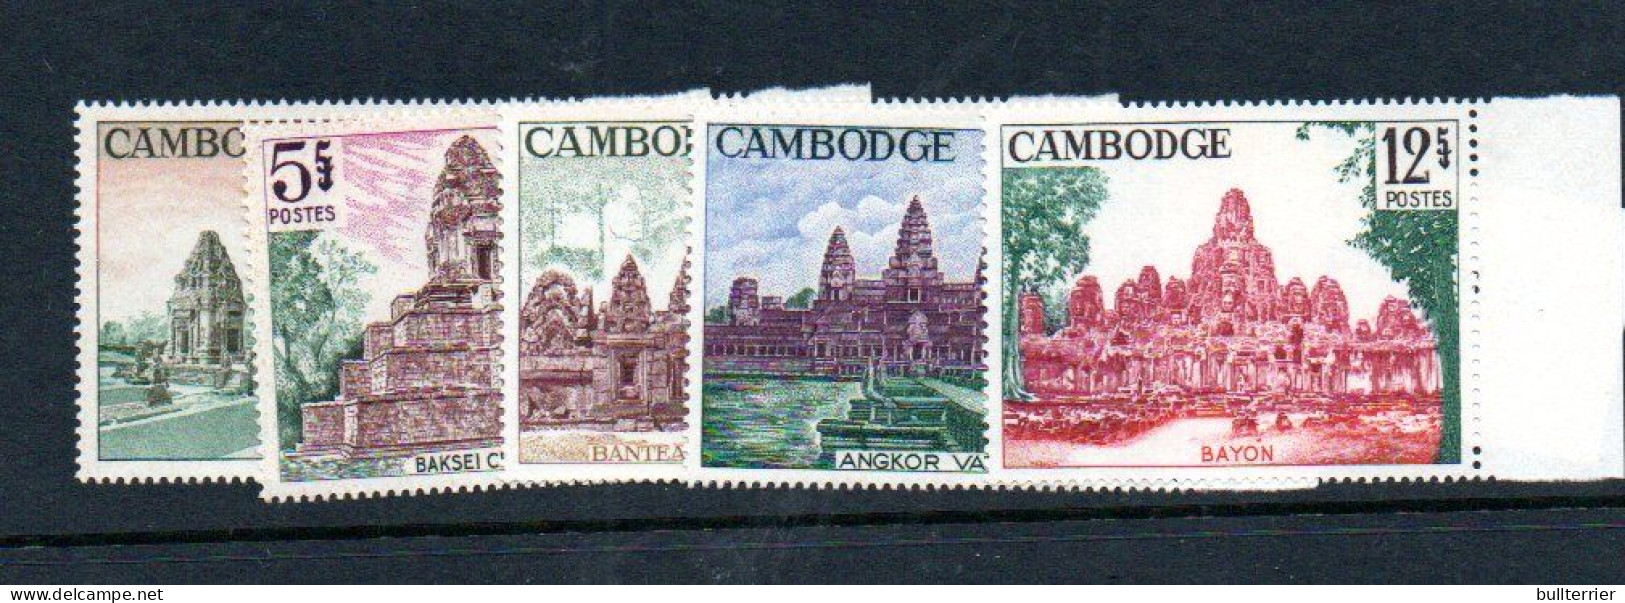 CAMBODIA - 1966 - TEMPLES SET OF 6  MINT NEVER HINGED - Kambodscha